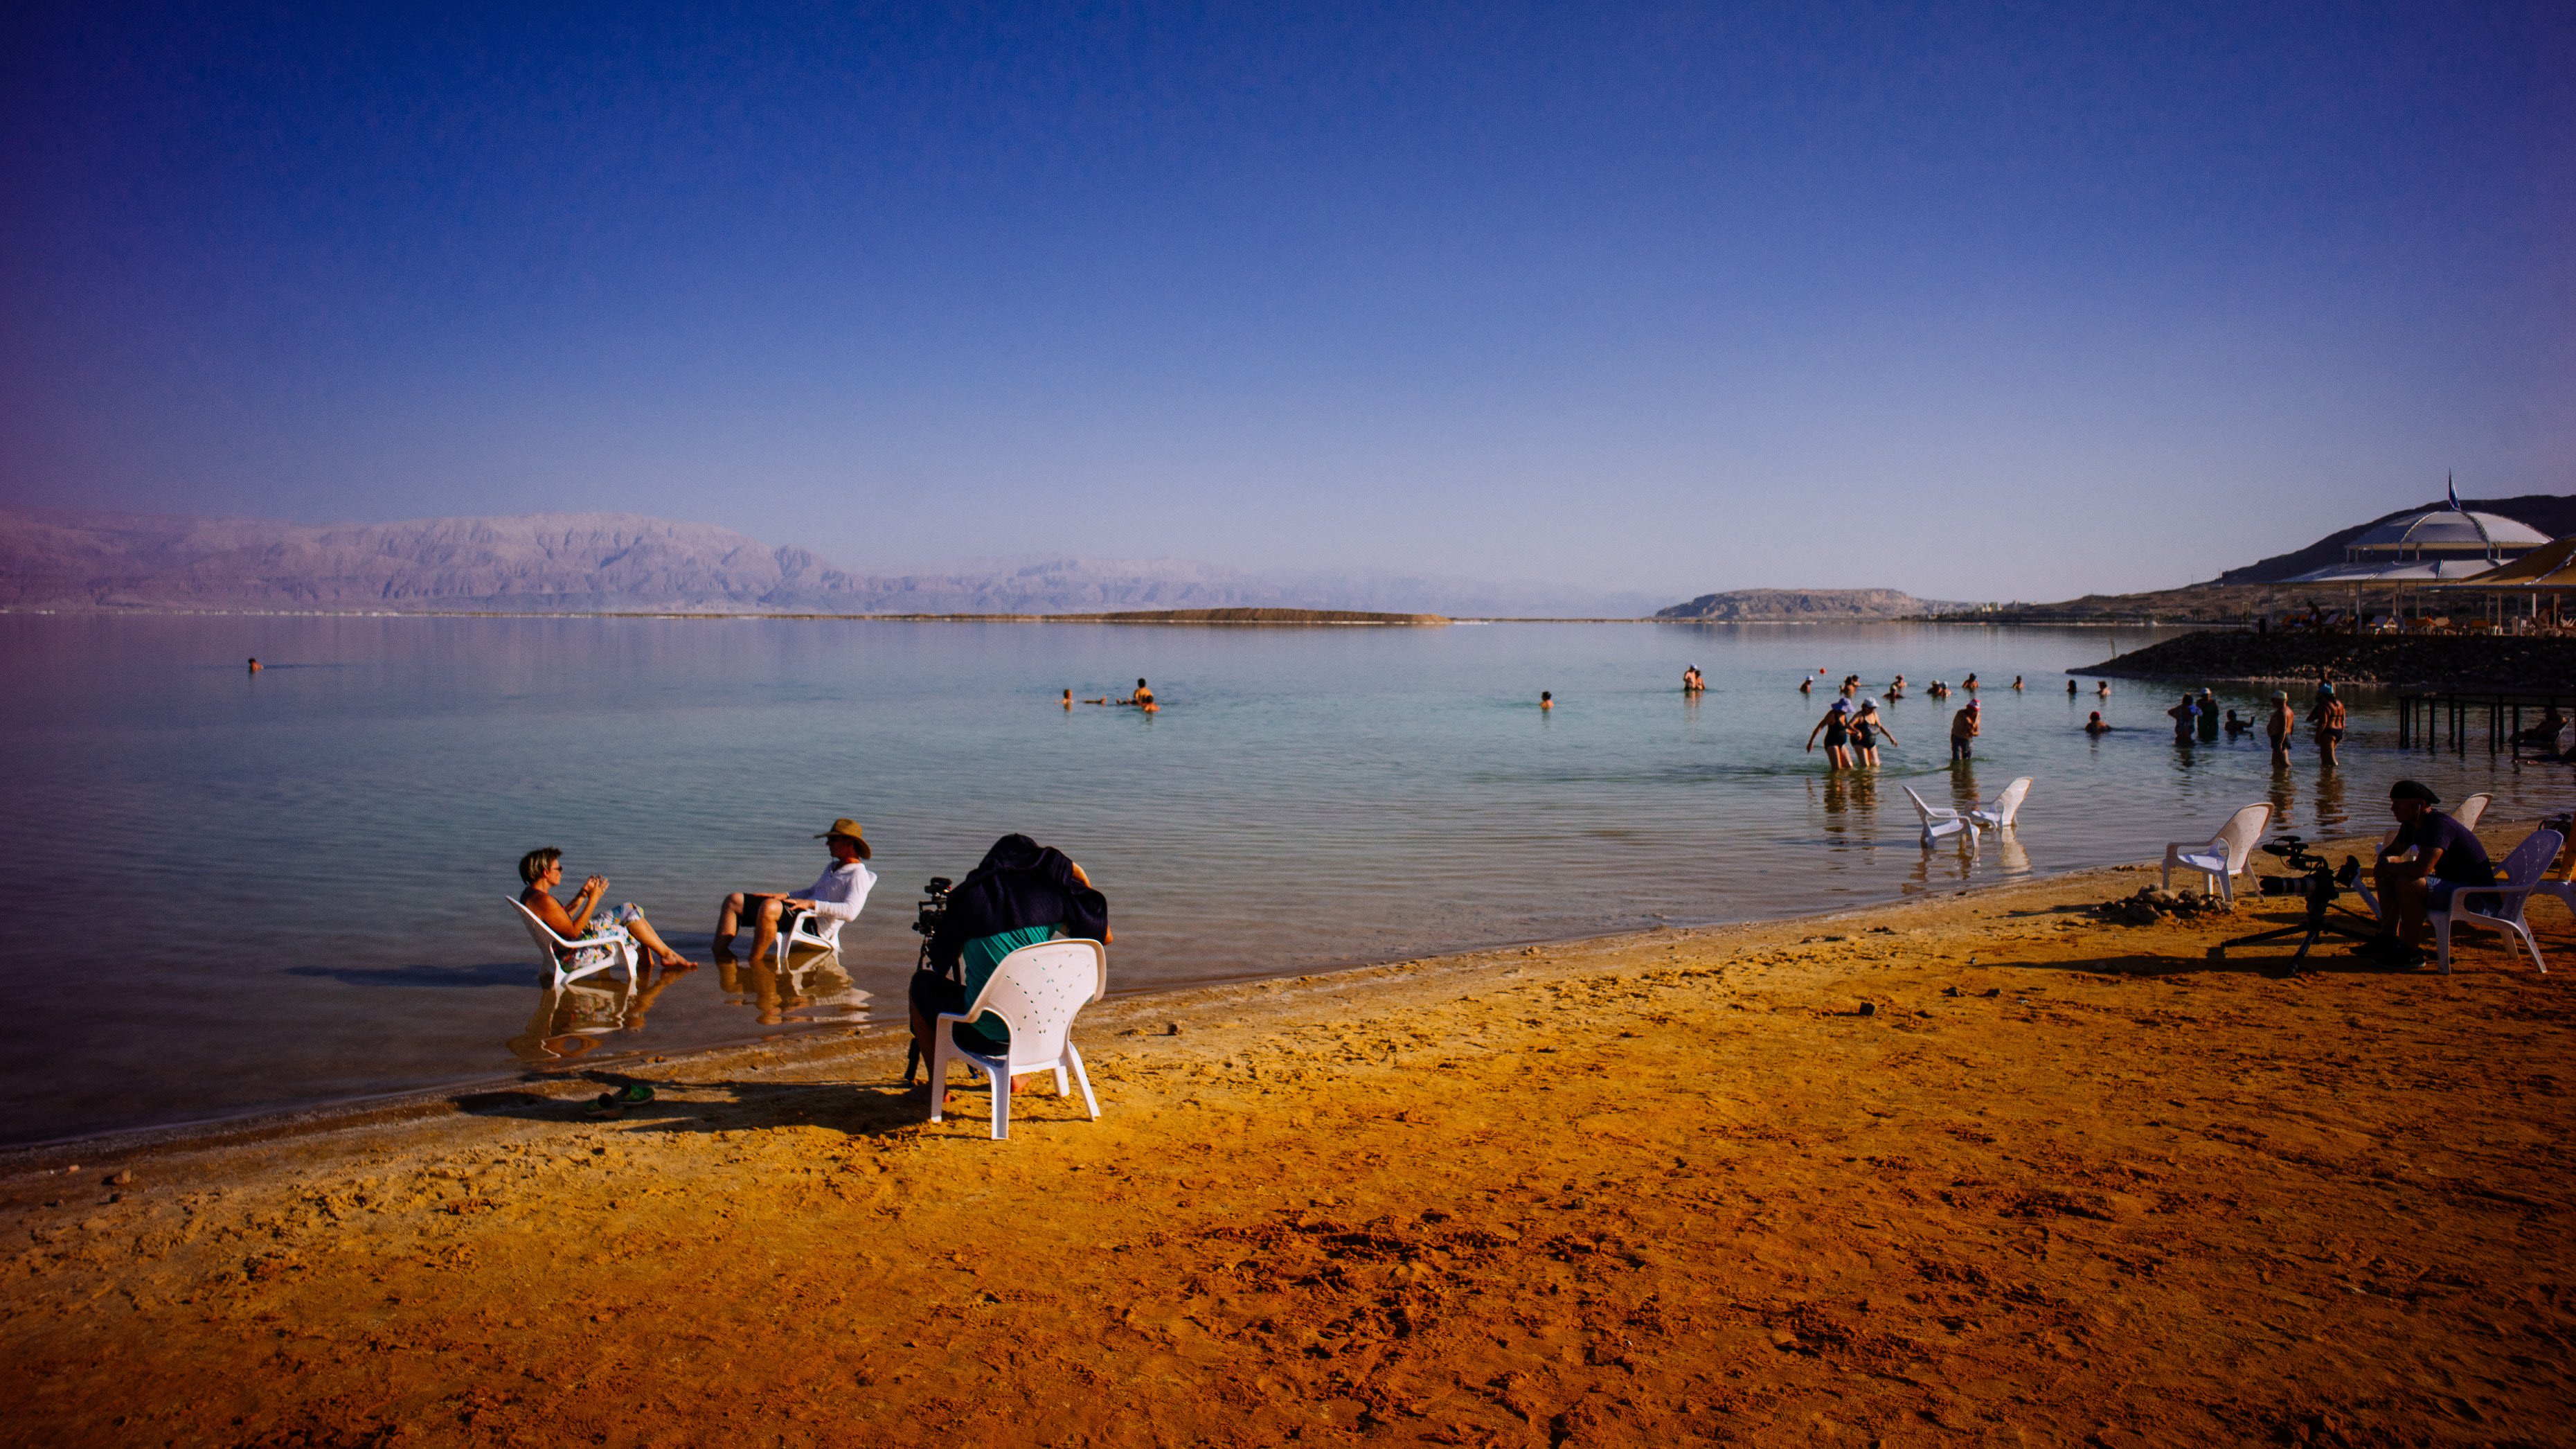 There's a Way to Save Jordan. But It Might Kill the Dead Sea